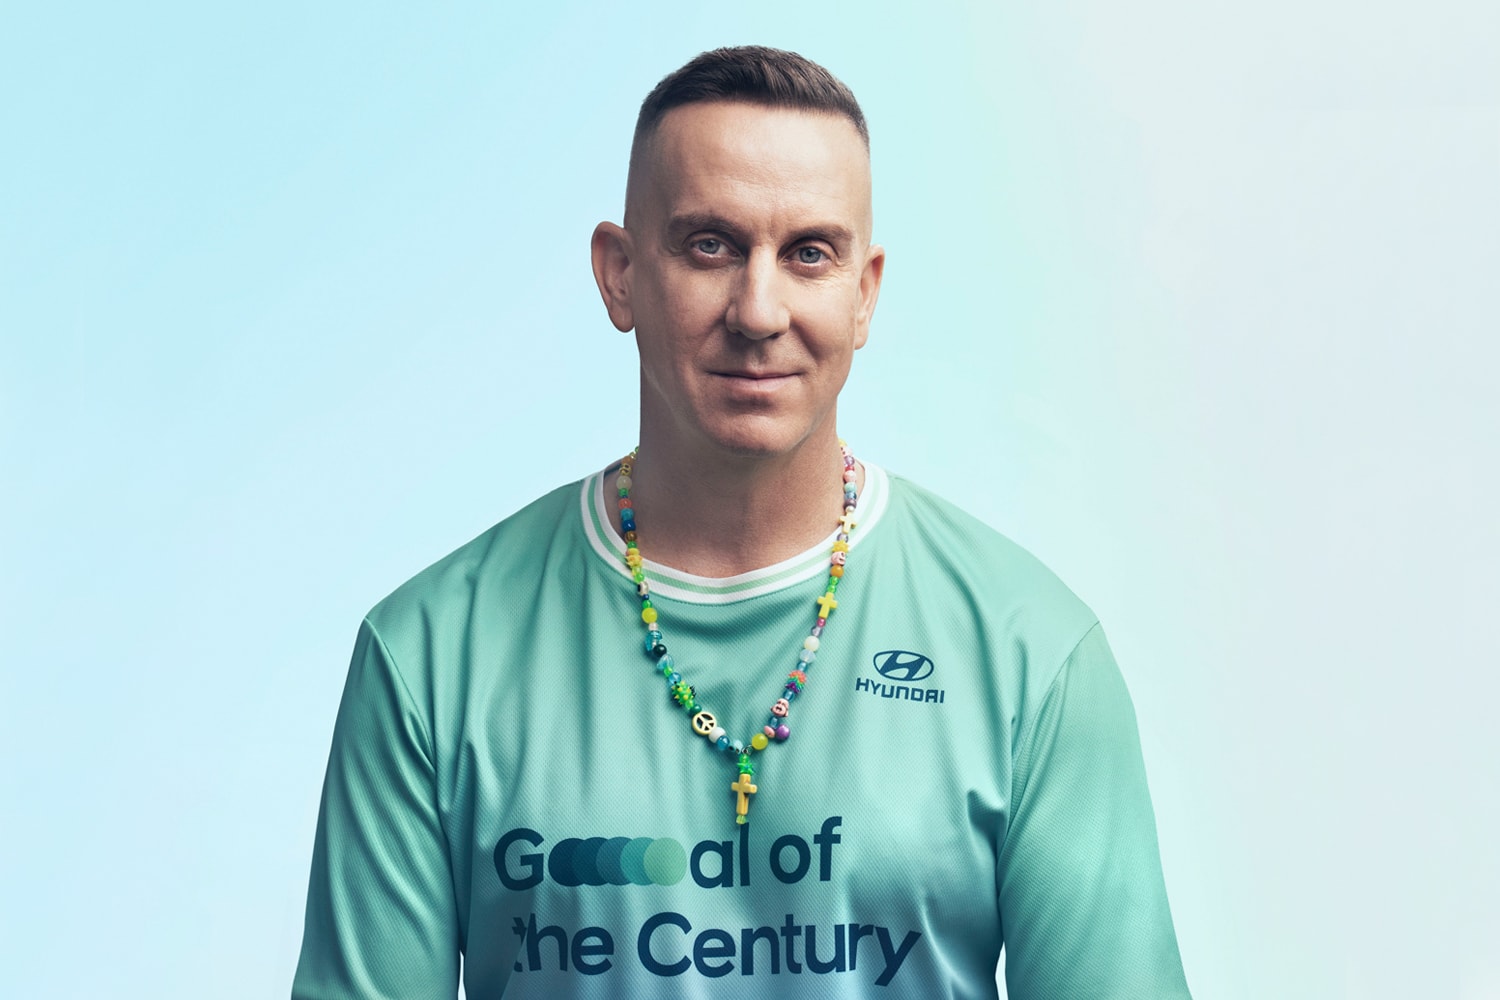 jeremy scott hyundai fifa 2022 campaign jersey world cup football upcycling goal of the century team century